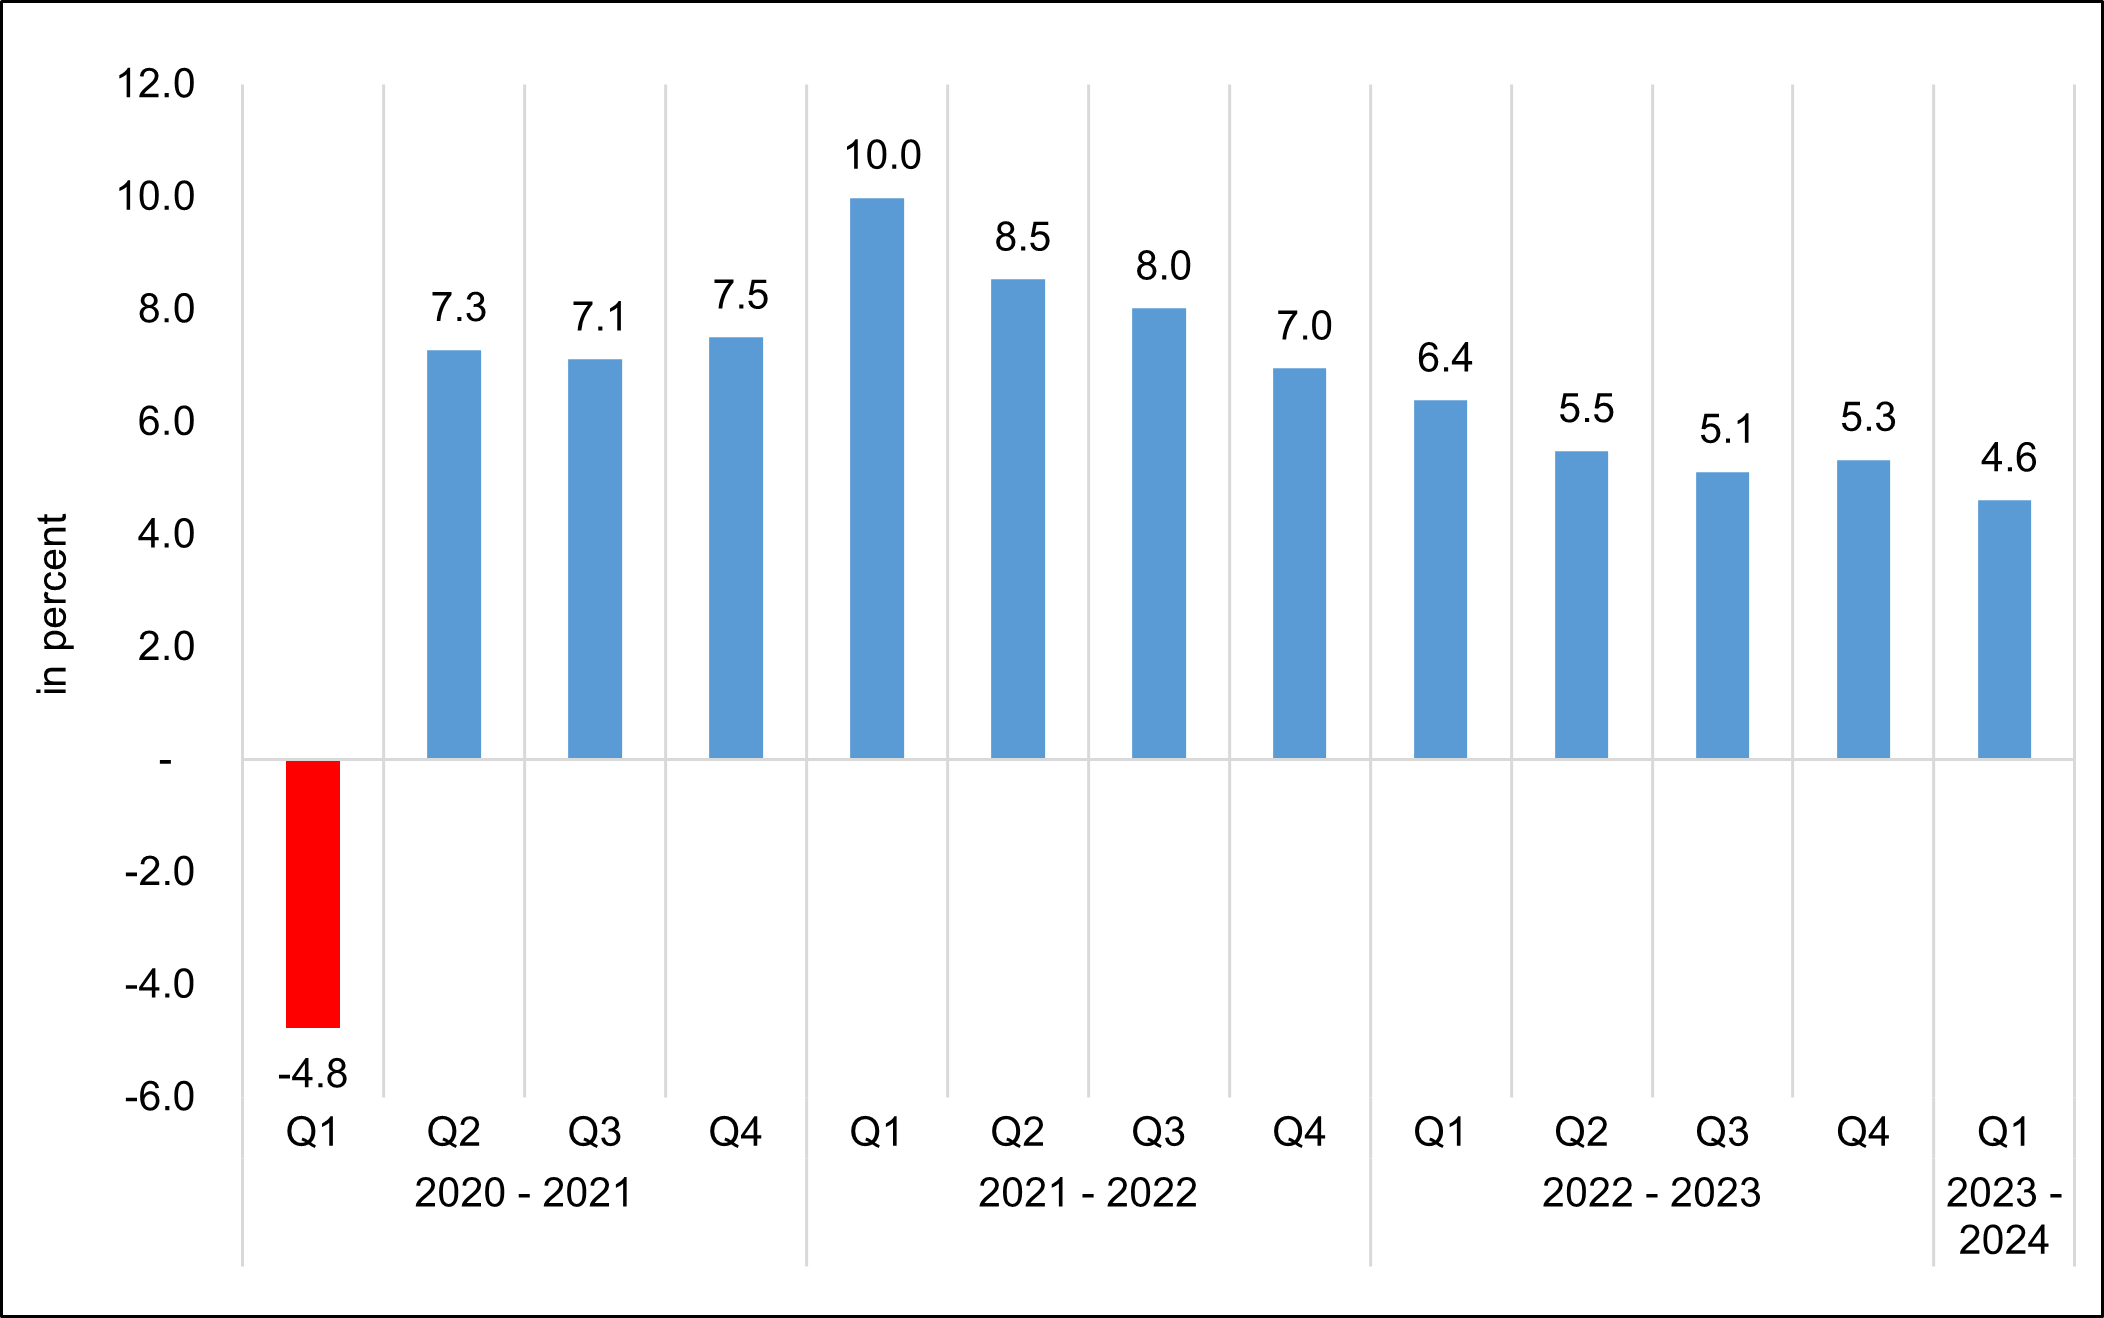 Figure 5. Household Final Consumption Expenditure, Q1 2021 to Q1 2024 Growth Rates, At Constant 2018 Prices